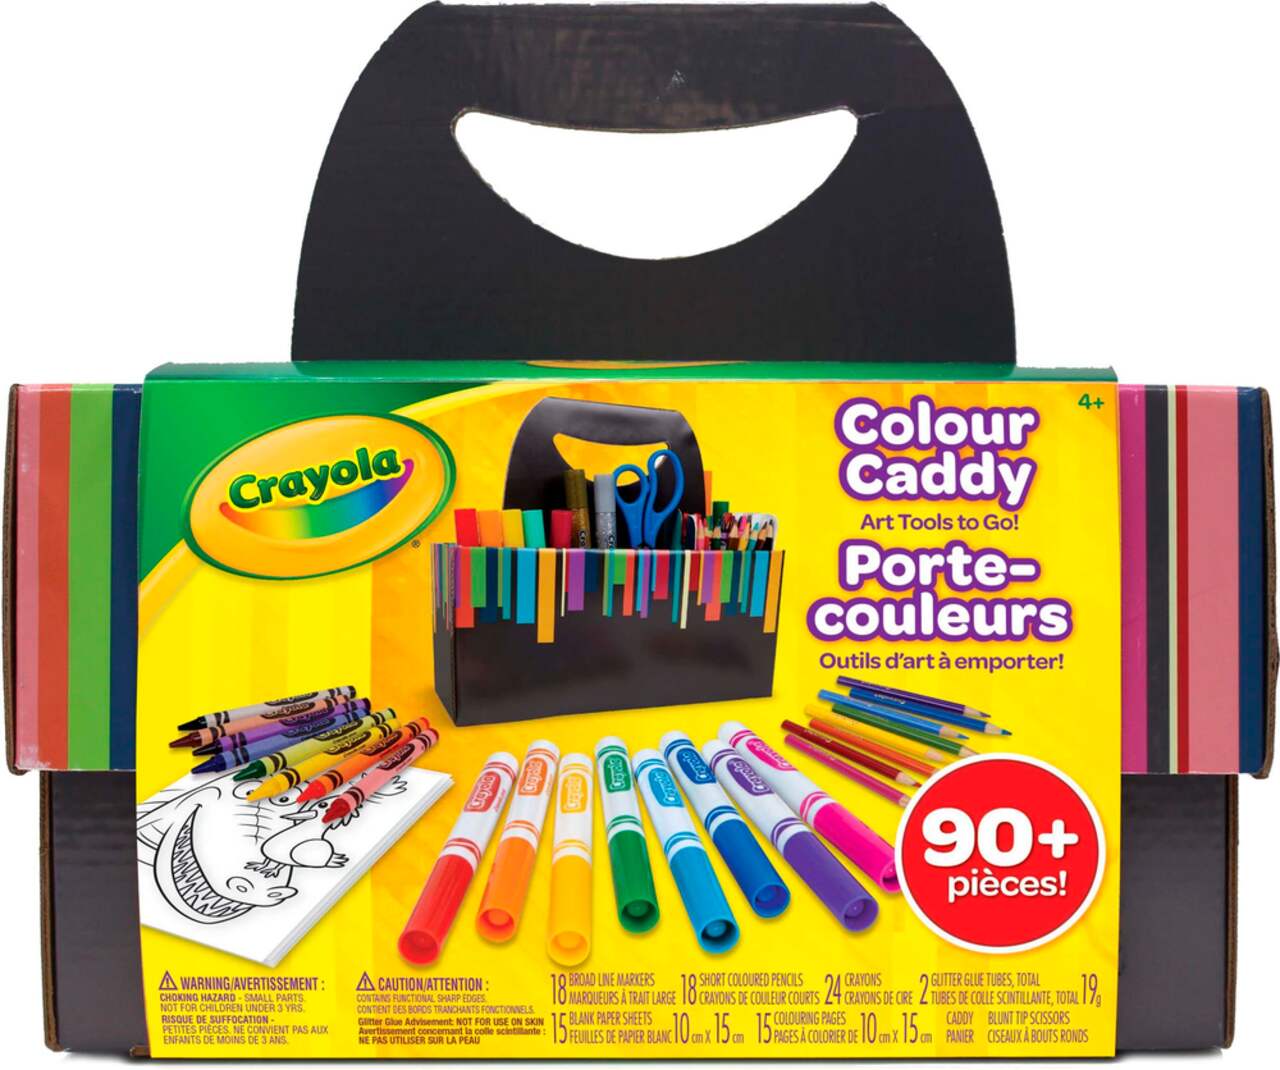 https://media-www.canadiantire.ca/product/seasonal-gardening/toys/preschool-toys-activities/0501216/crayola-colour-caddy-29312d75-37ce-462b-bf98-27f9cedf0bc3.png?imdensity=1&imwidth=640&impolicy=mZoom